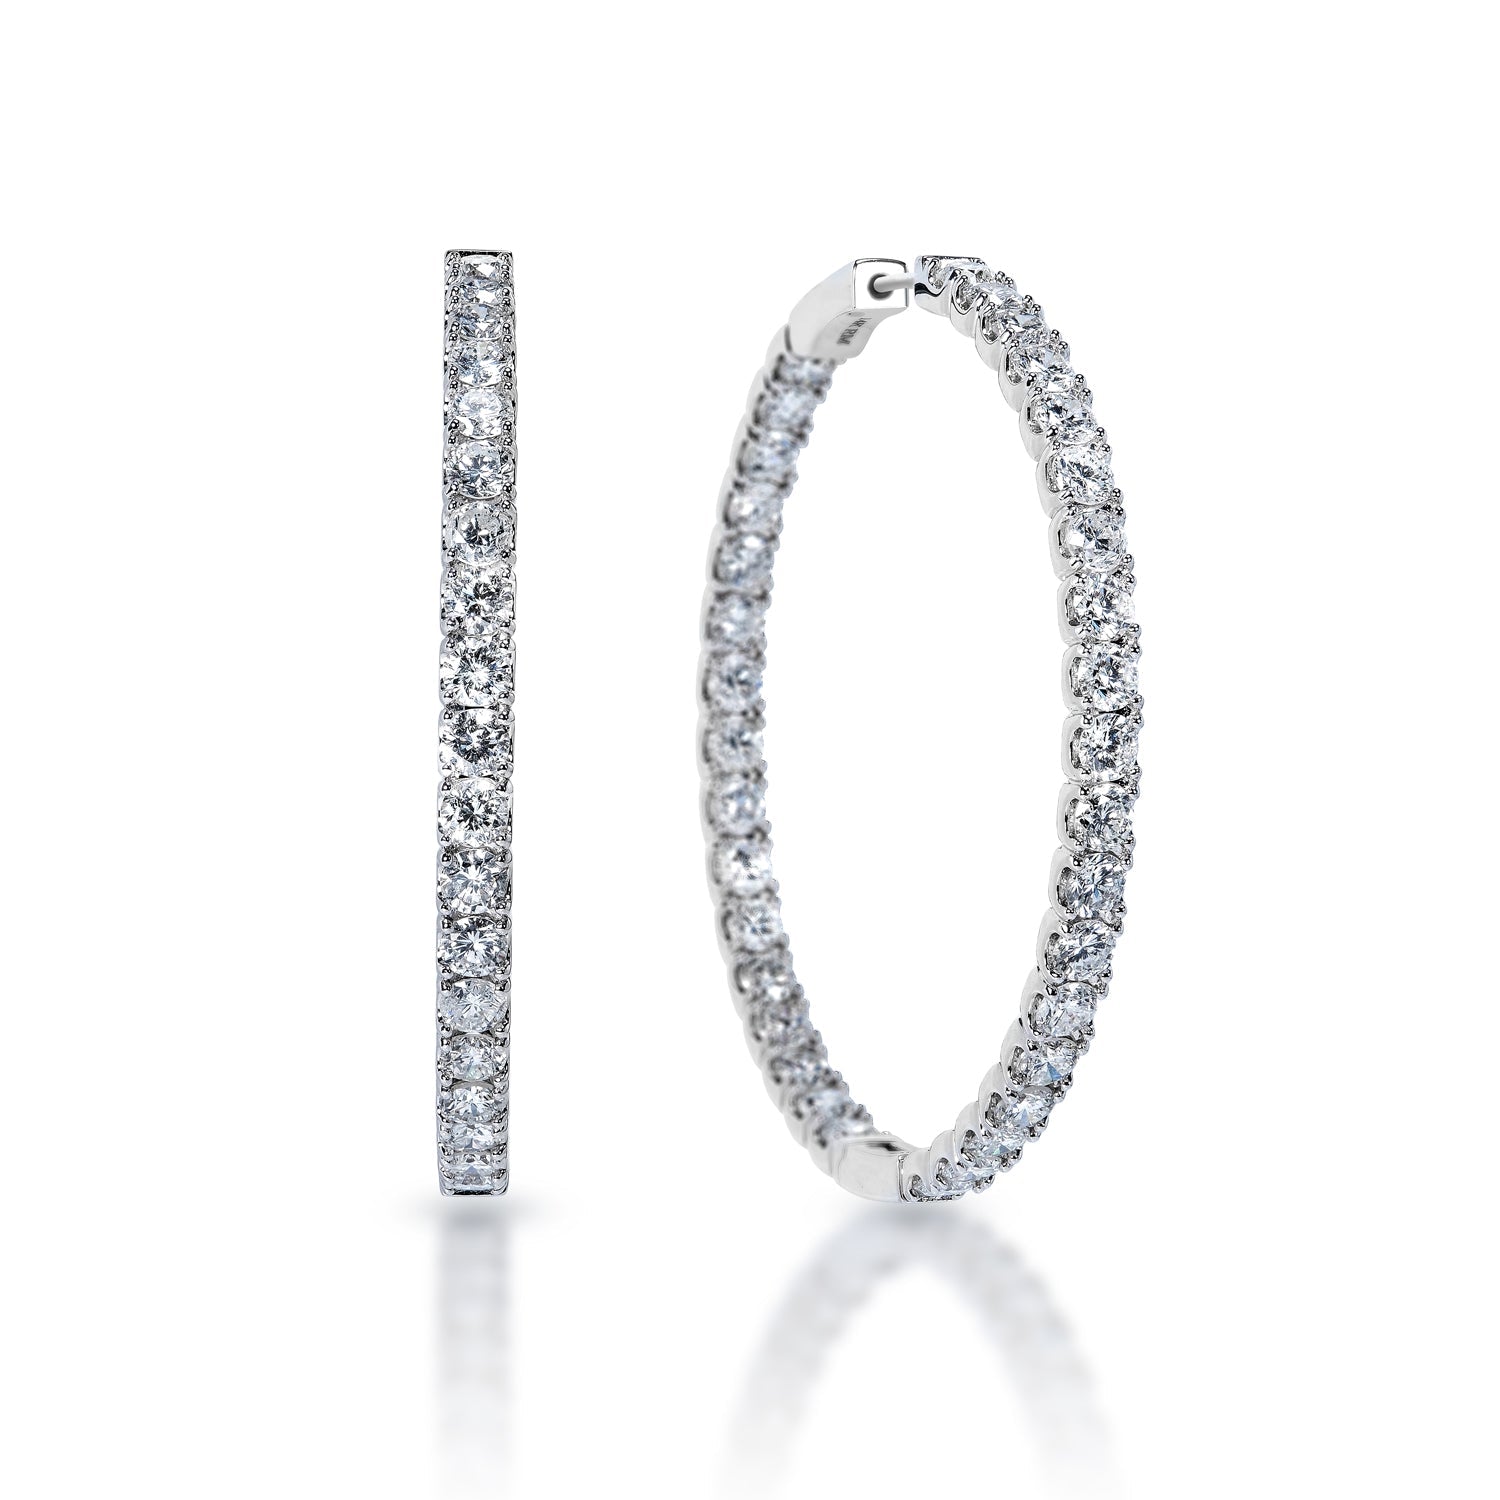 Mikaela 2 inch 12 Carat Round Brilliant Diamond Hoop Earrings in 14k White Gold Front and Side View